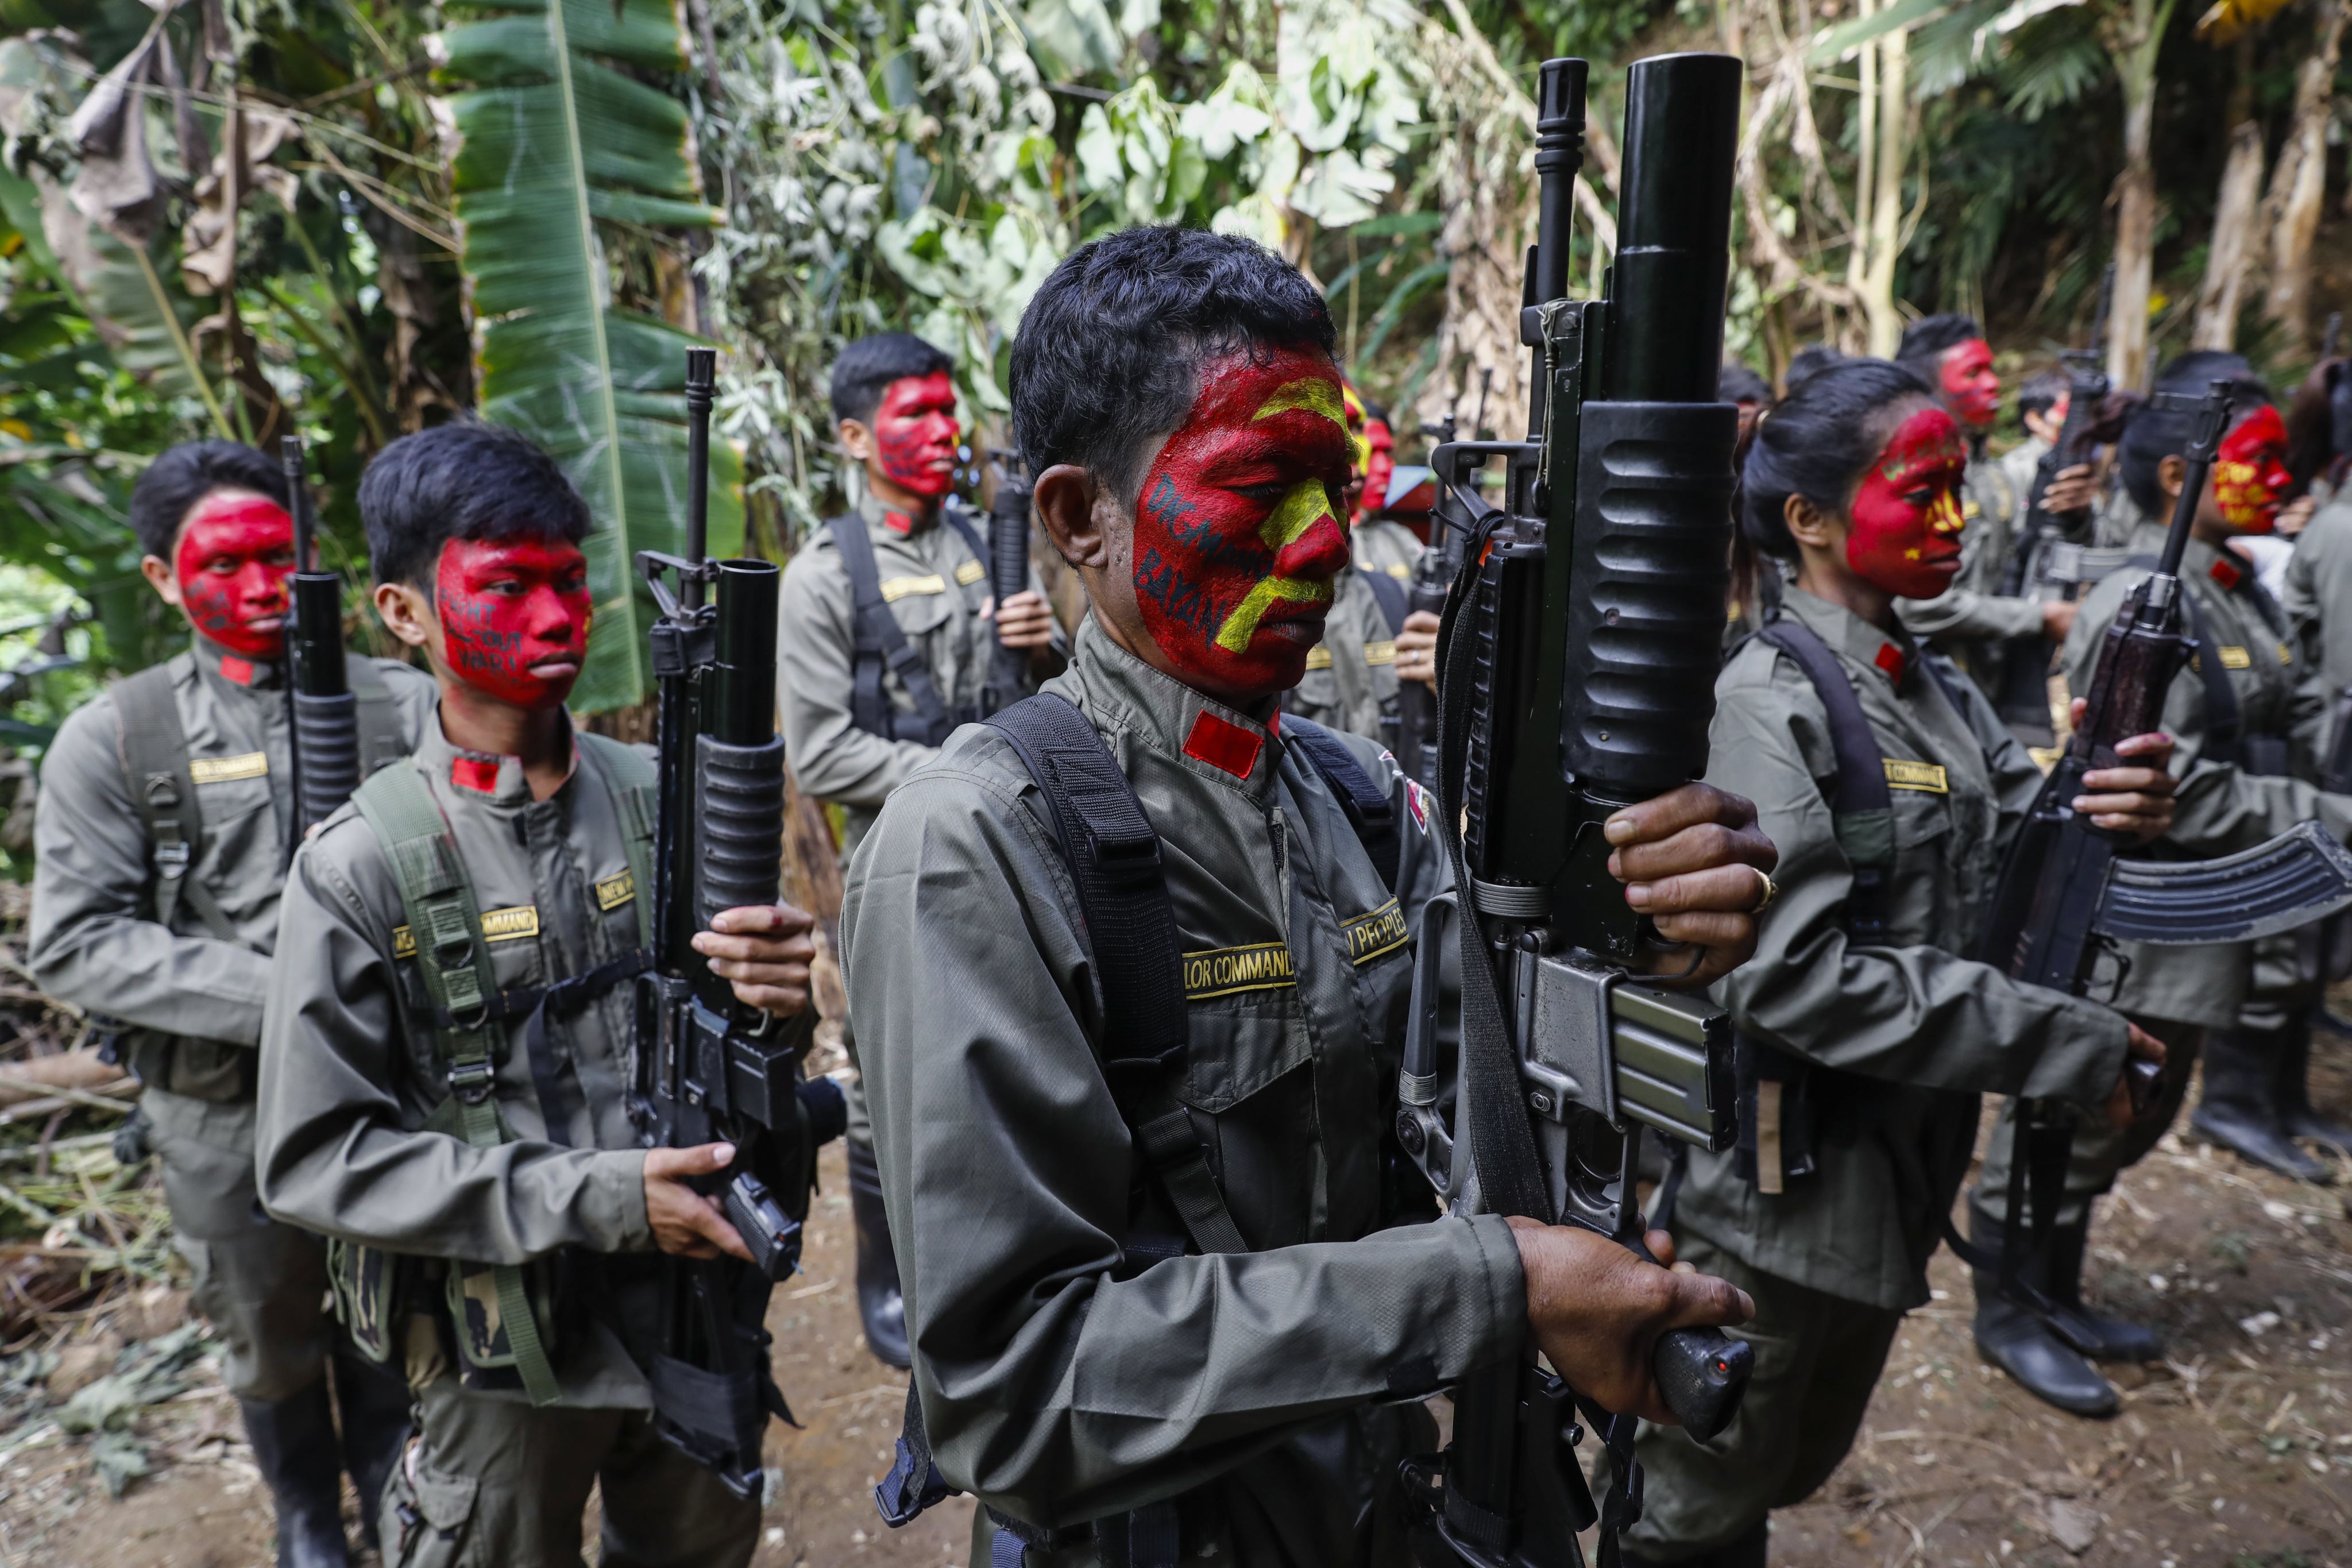 Fighters of the New People’s Army, the armed wing of the Philippine Communist Party, in formation in the Sierra Madre mountains of Luzon region on July 20, 2017. Photo: EPA